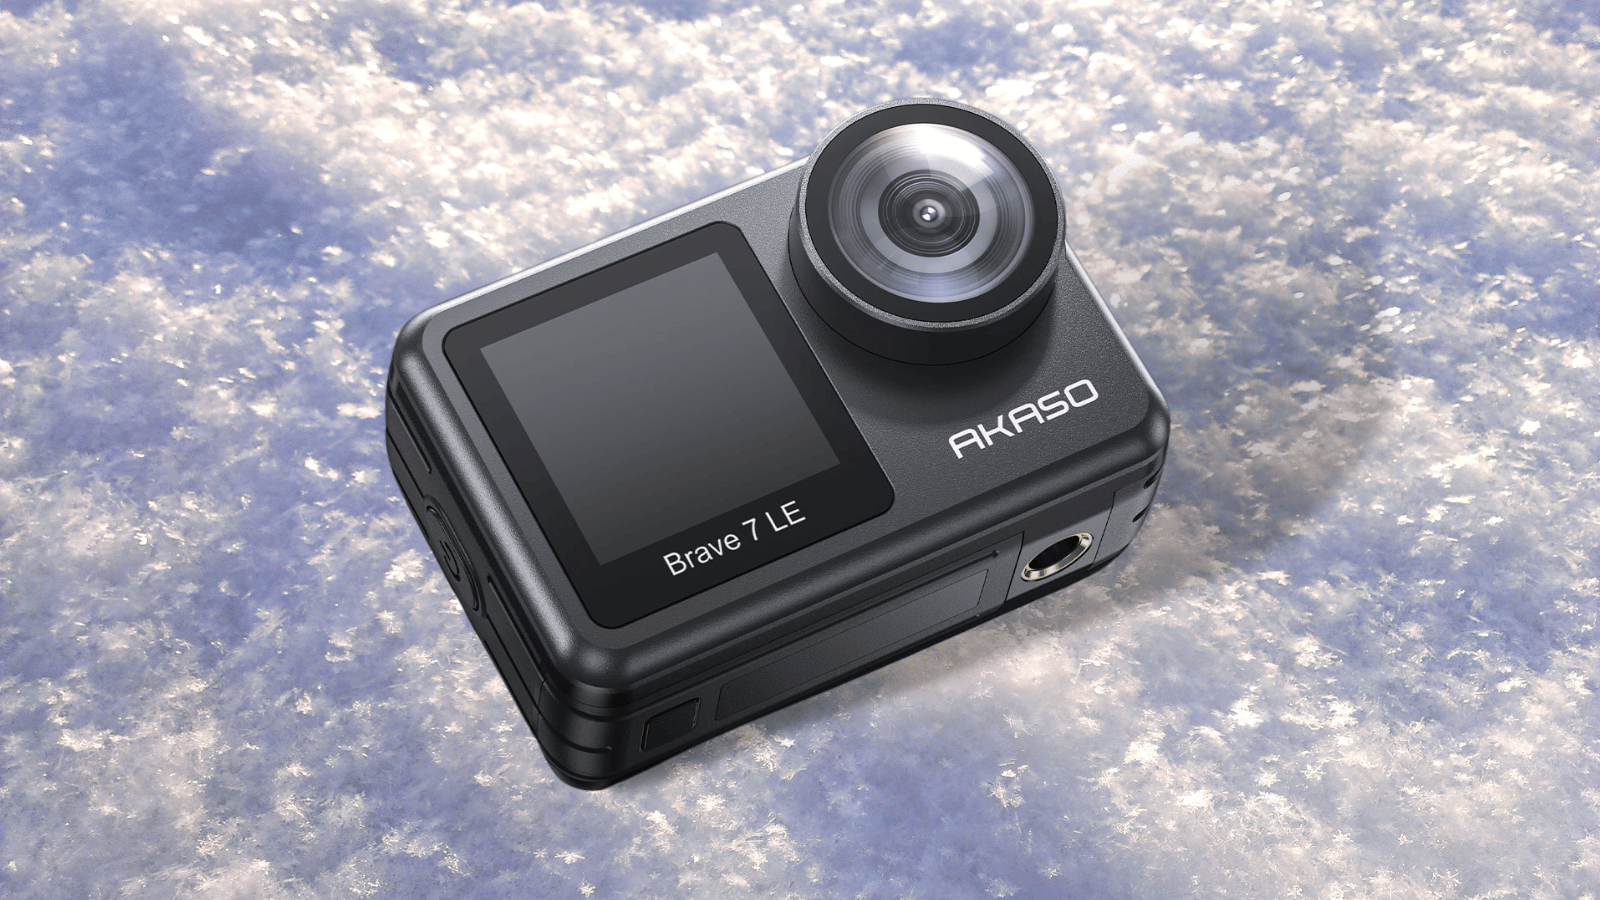 AKASO Brave 7 LE Action Camera Hands-on Review